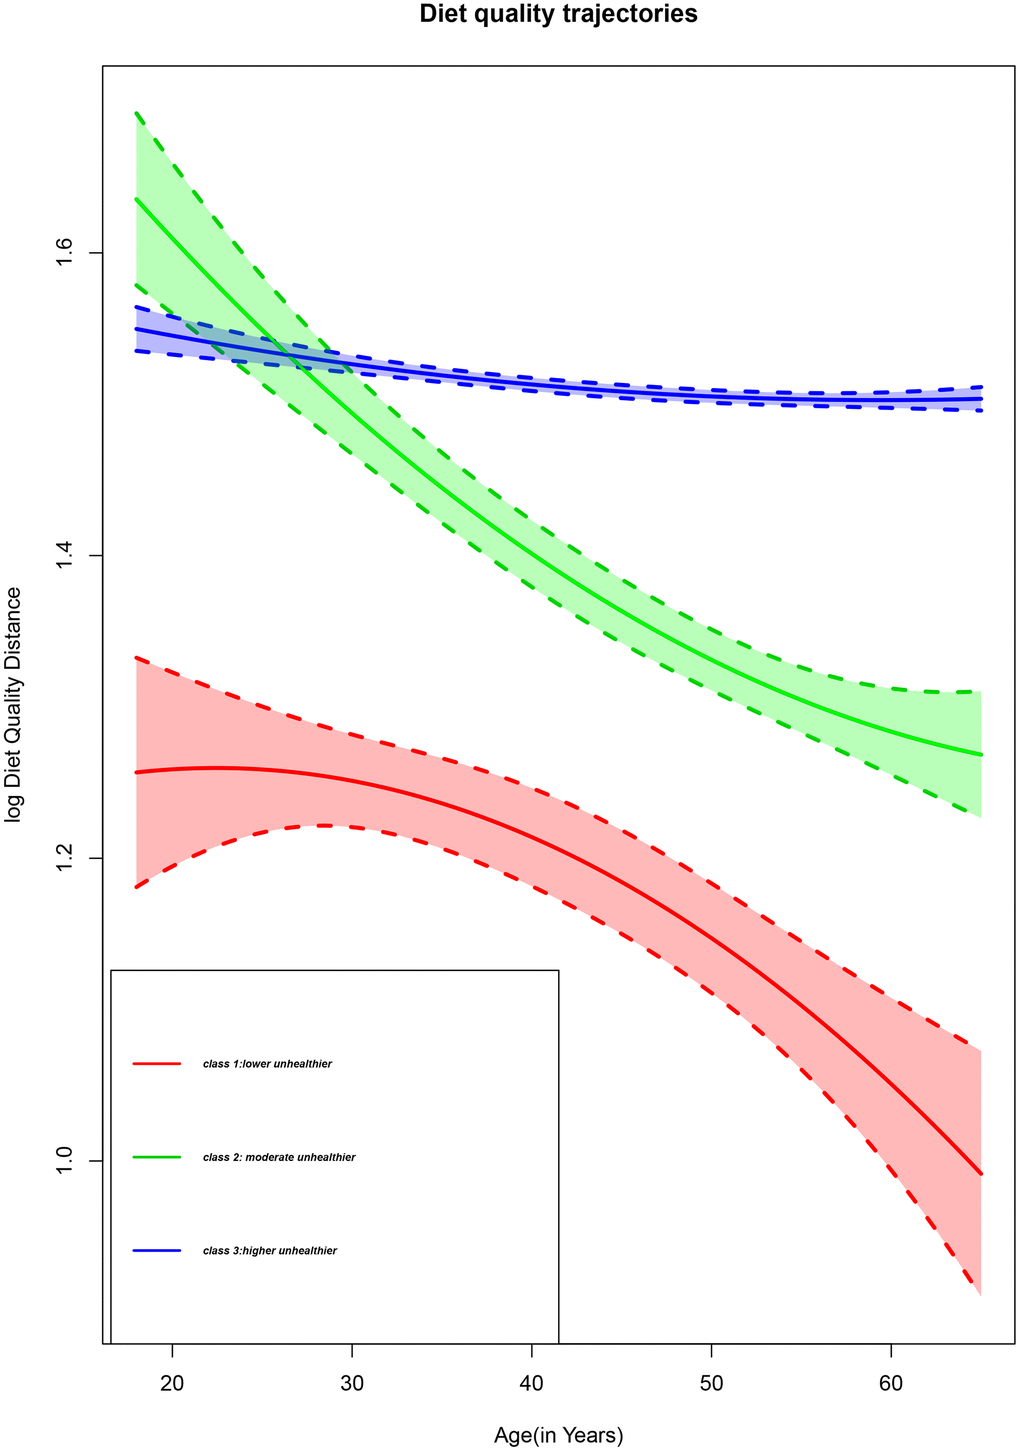 Diet quality trajectories of Chinese adults from the CHNS 1997-2011.